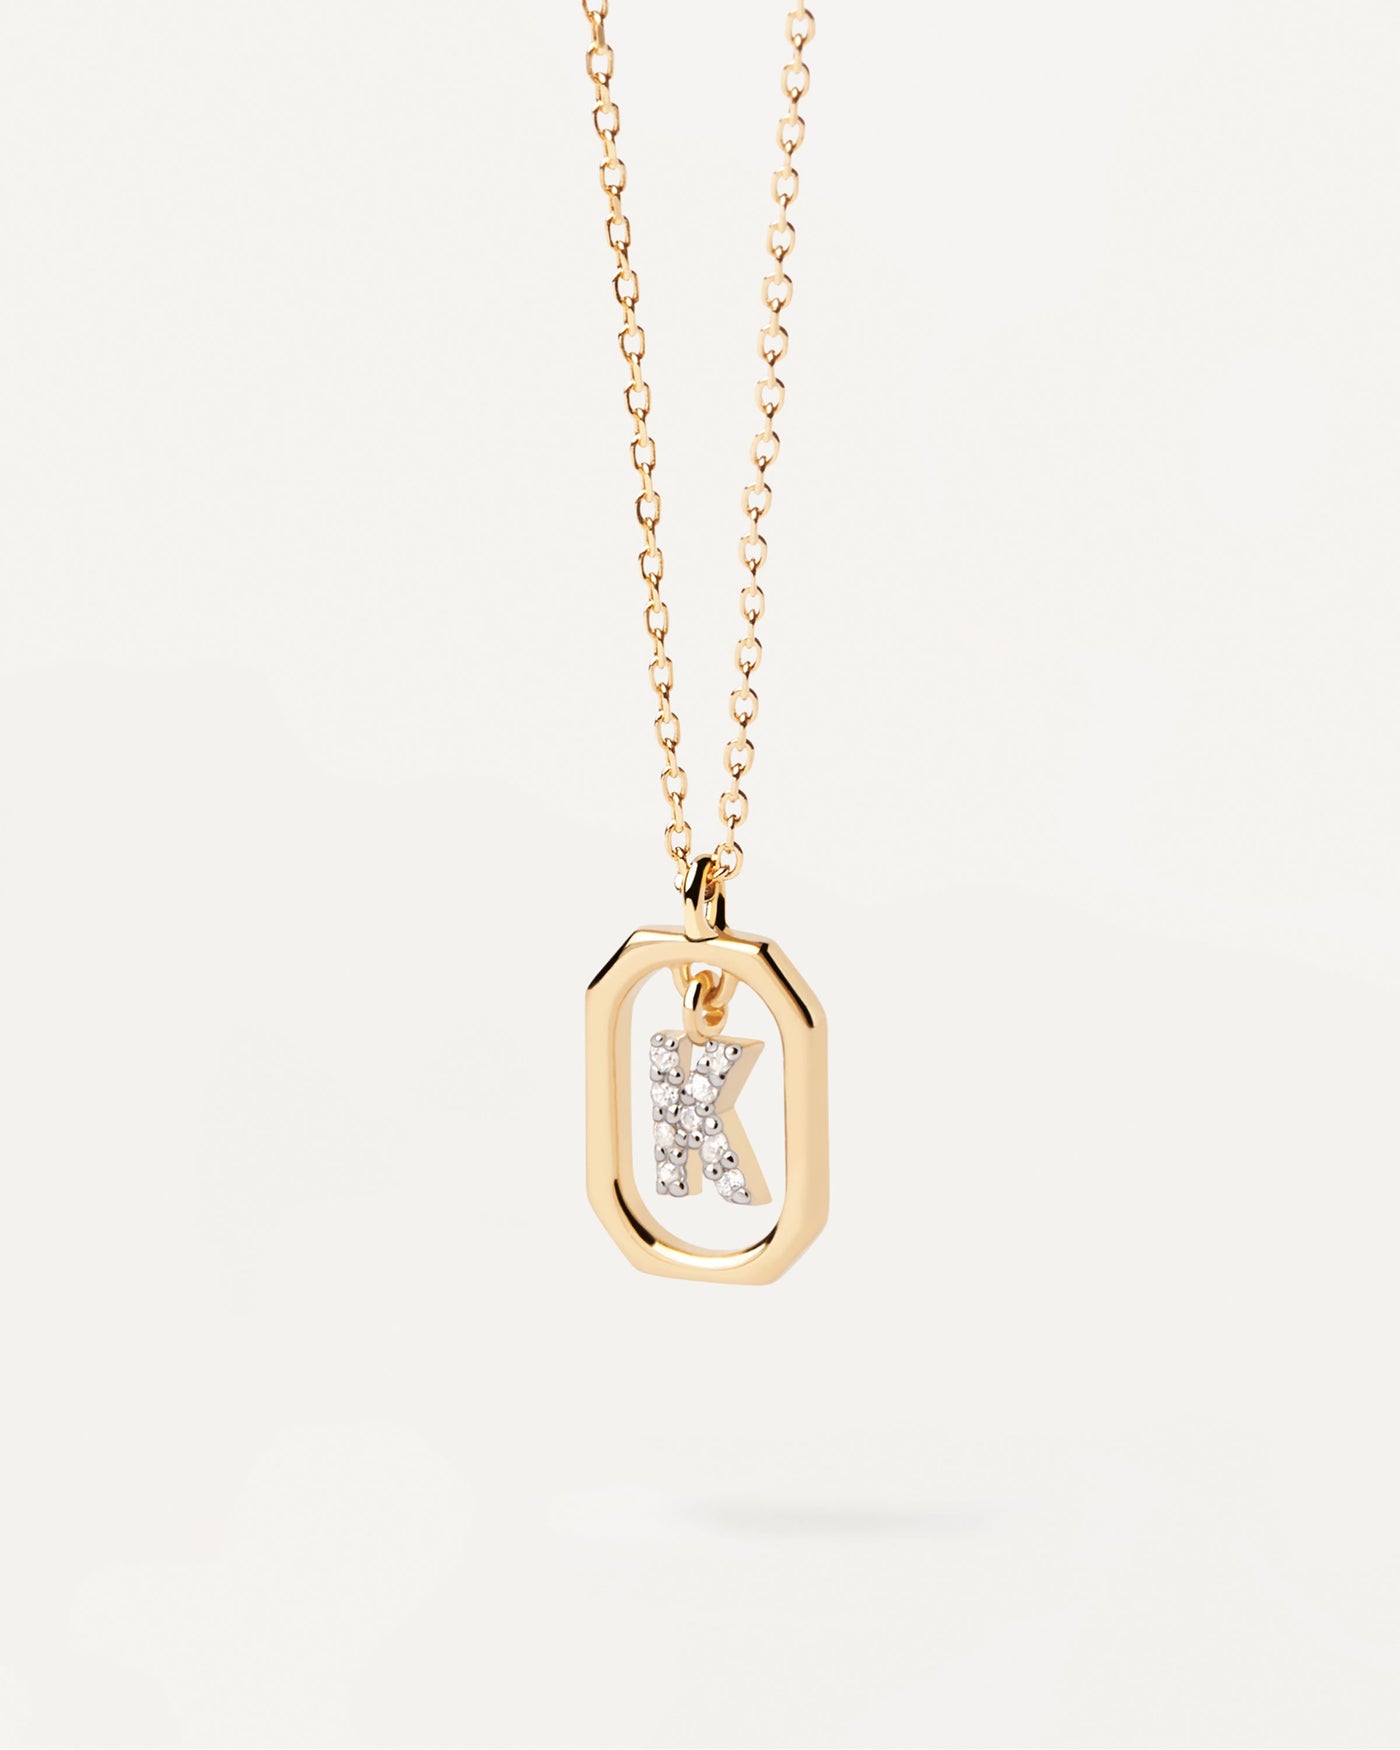 2023 Selection | Mini Letter K Necklace. Small initial K necklace in zirconia inside gold-plated silver octagonal pendant. Get the latest arrival from PDPAOLA. Place your order safely and get this Best Seller. Free Shipping.